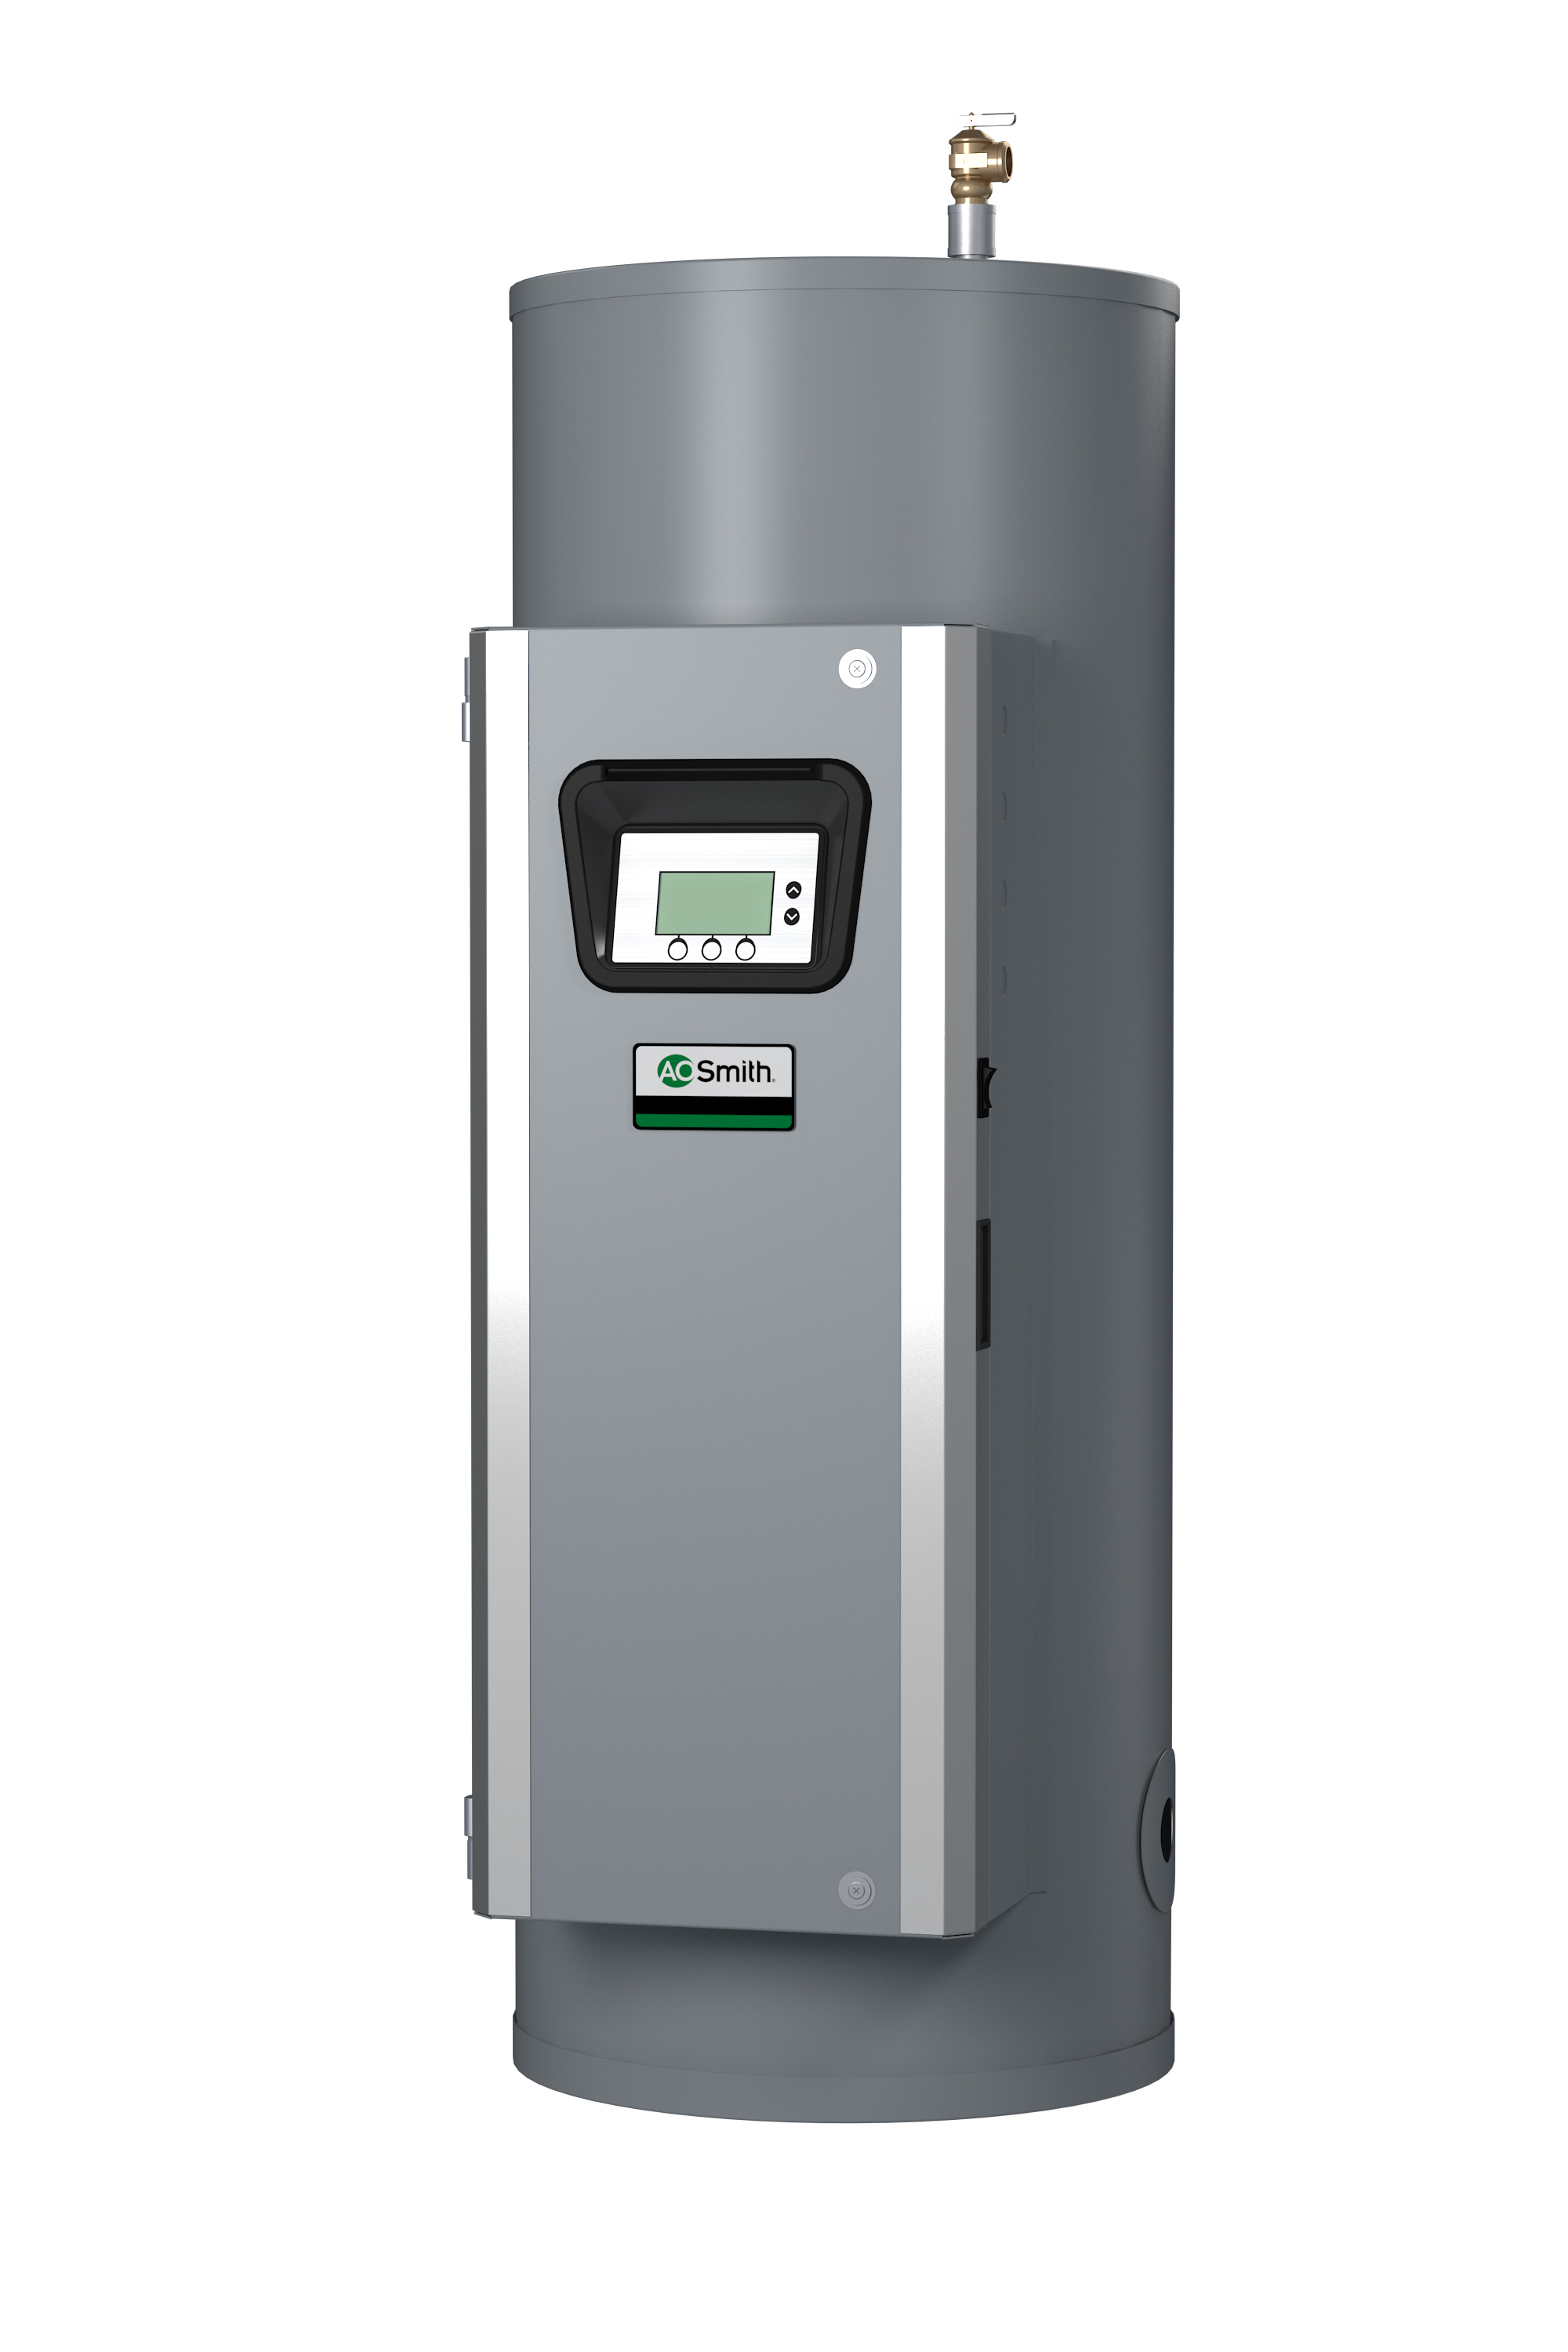 AO SMITH DSE-50A-45, 50 GALLONS, 45KW, 480 VOLT, 54.1 AMPS, 3 PHASE, 3 ELEMENTS, ASME CUSTOM Xi SERIES HEAVY DUTY COMMERCIAL ELECTRIC WATER HEATER